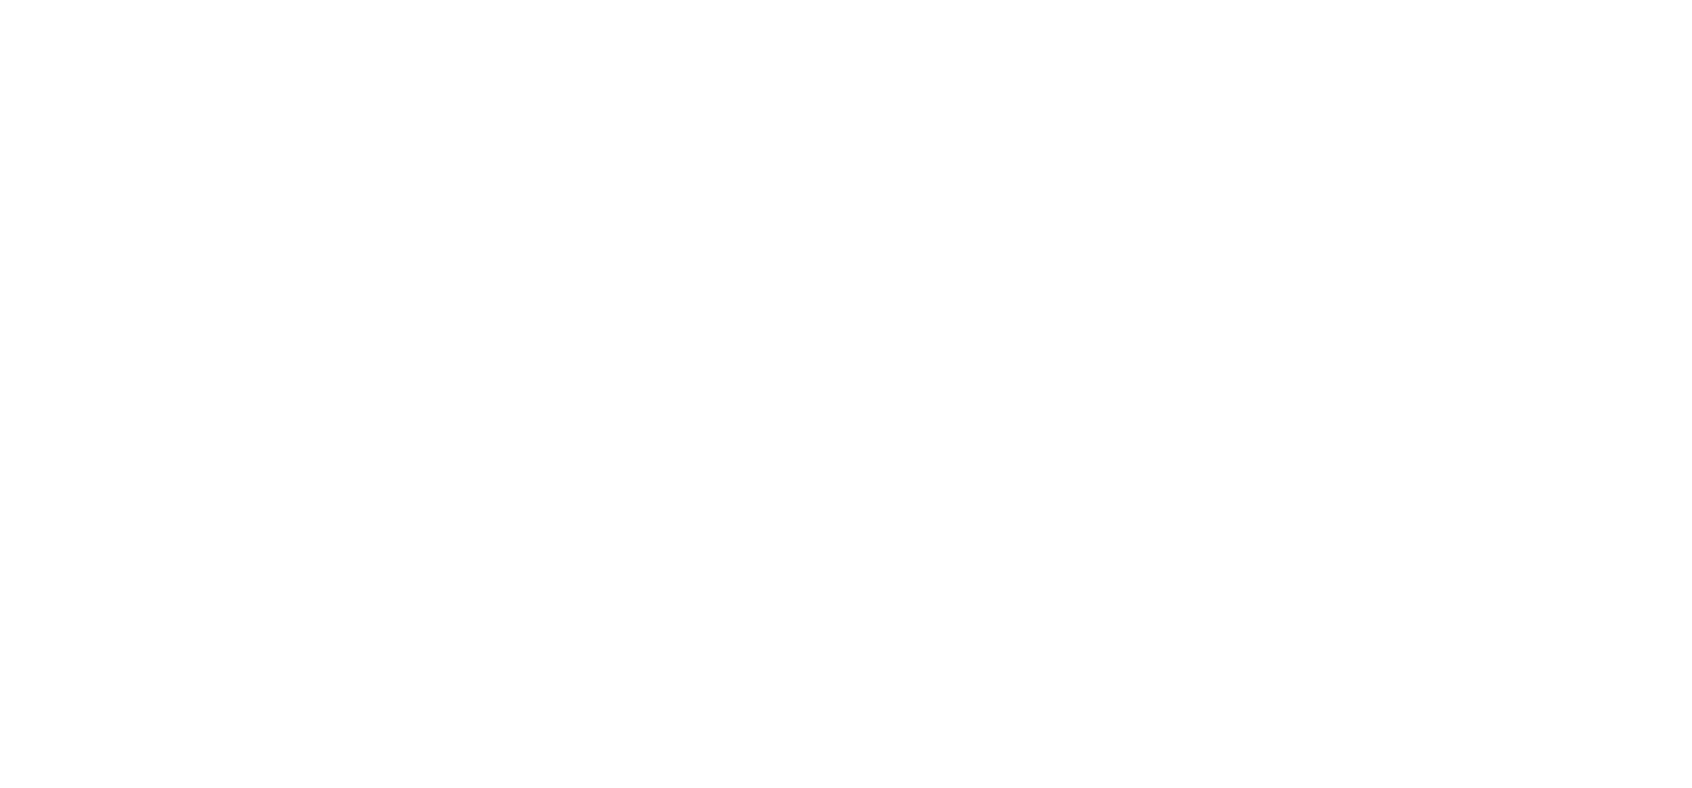 GOSAT-GW: Global Observing SATellite for Greenhouse gases and Water cycle